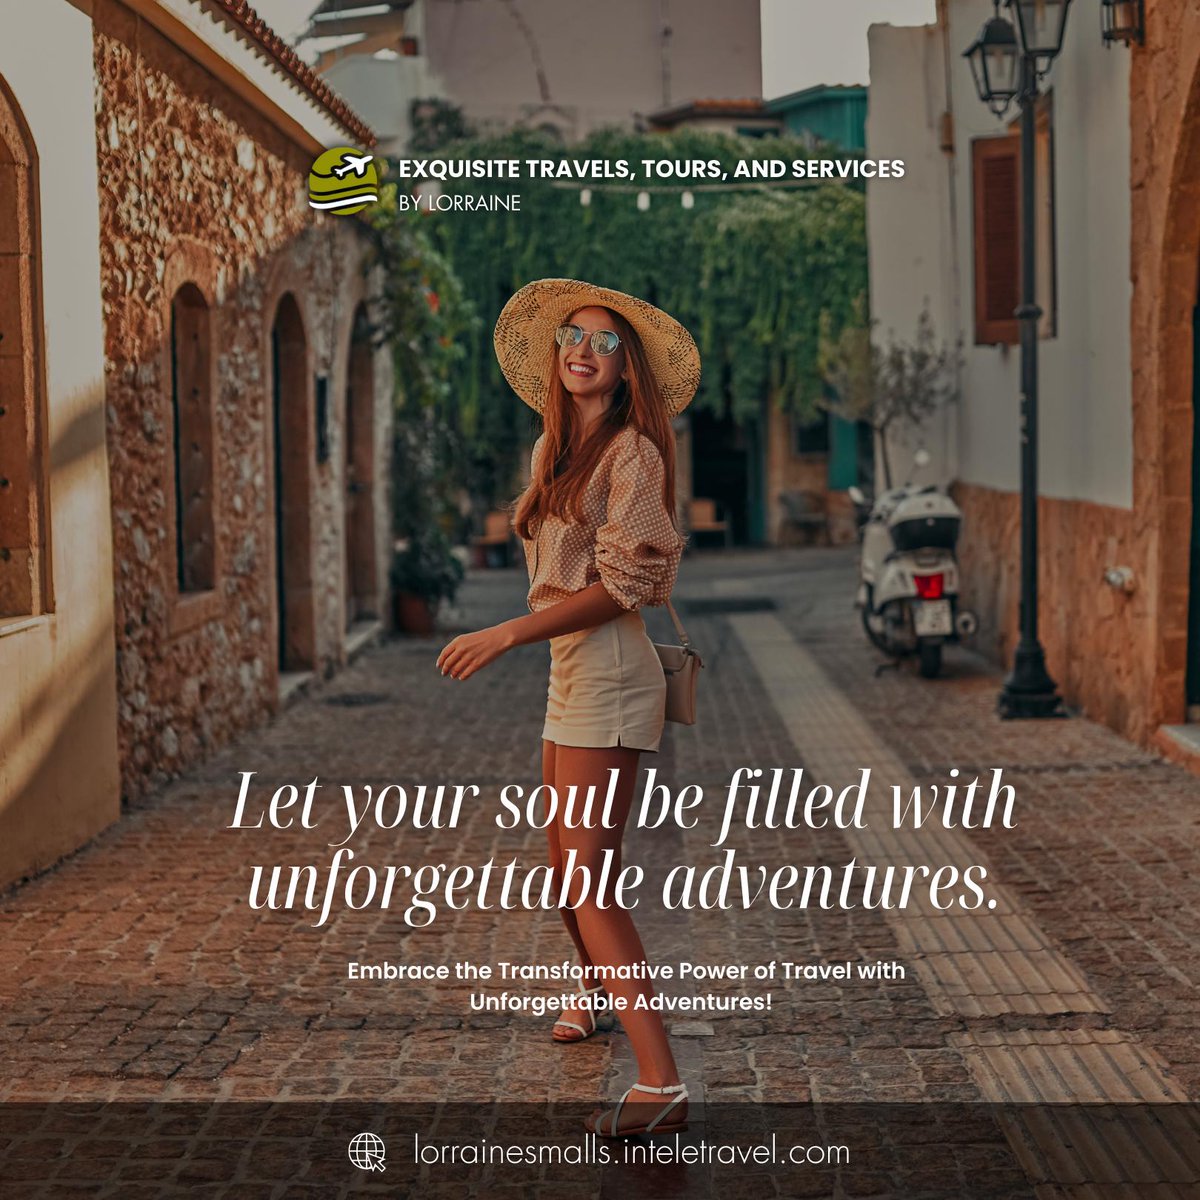 Jobs fill your pocket, but adventures fill your soul. 💼➡️❤️ Embrace the soul-stirring power of travel. Create moments that go beyond the ordinary and ignite your passion for exploration. Share your most soulful travel experience below! #AdventureSoul #JourneyOfTheHeart #Wande...